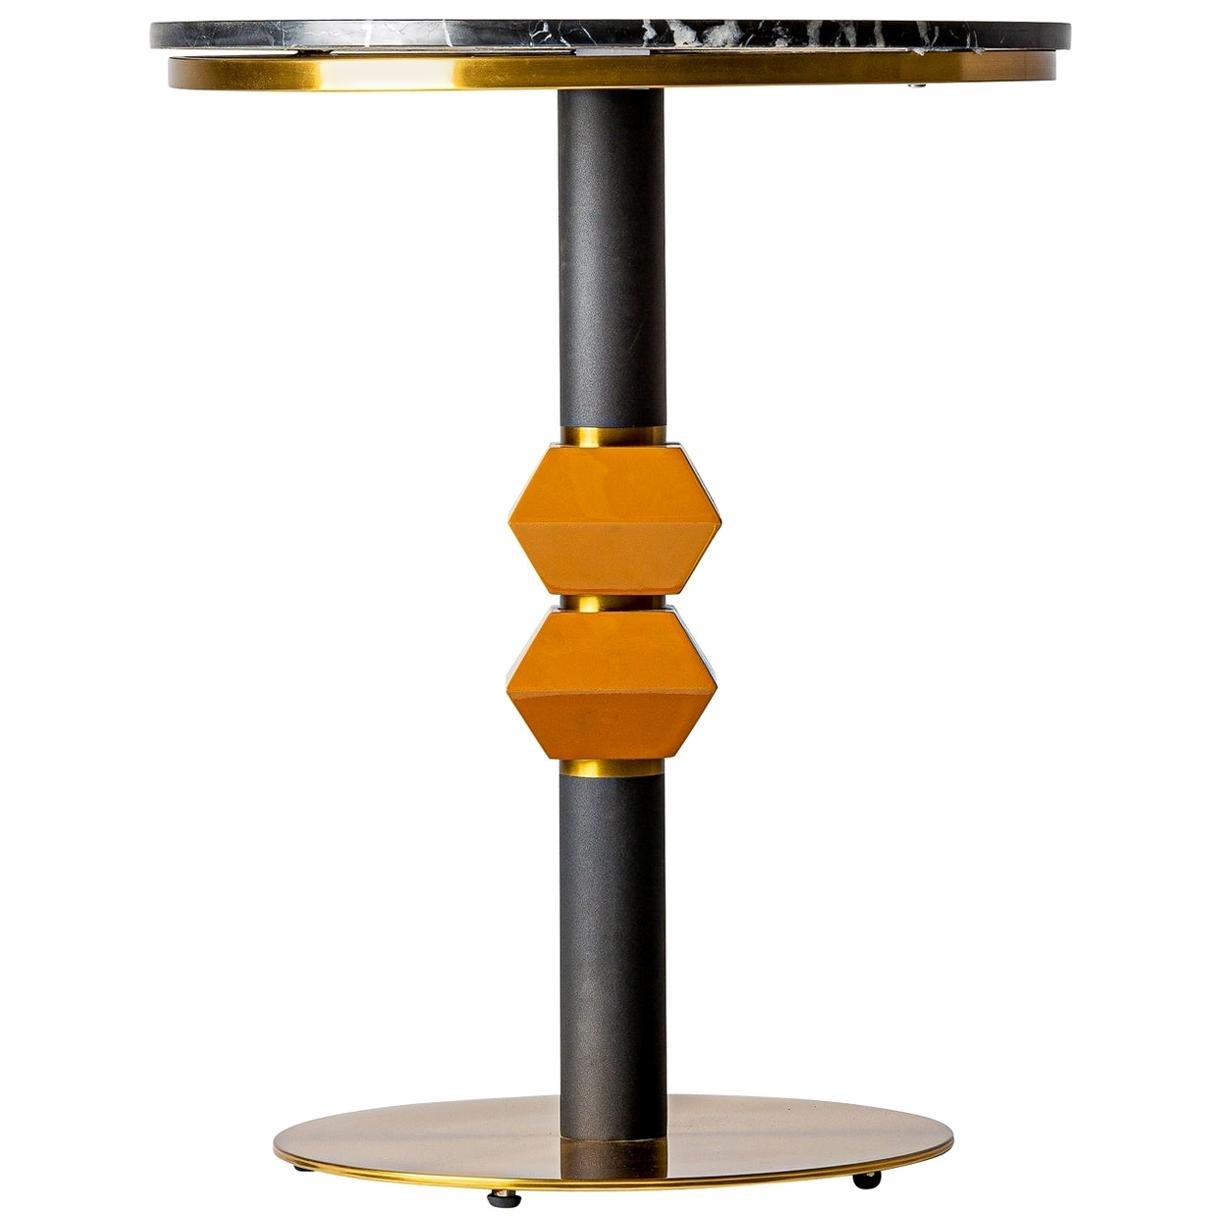 1980s Italian Design Style Round Black Marble and Gilt Pedestal Table For Sale